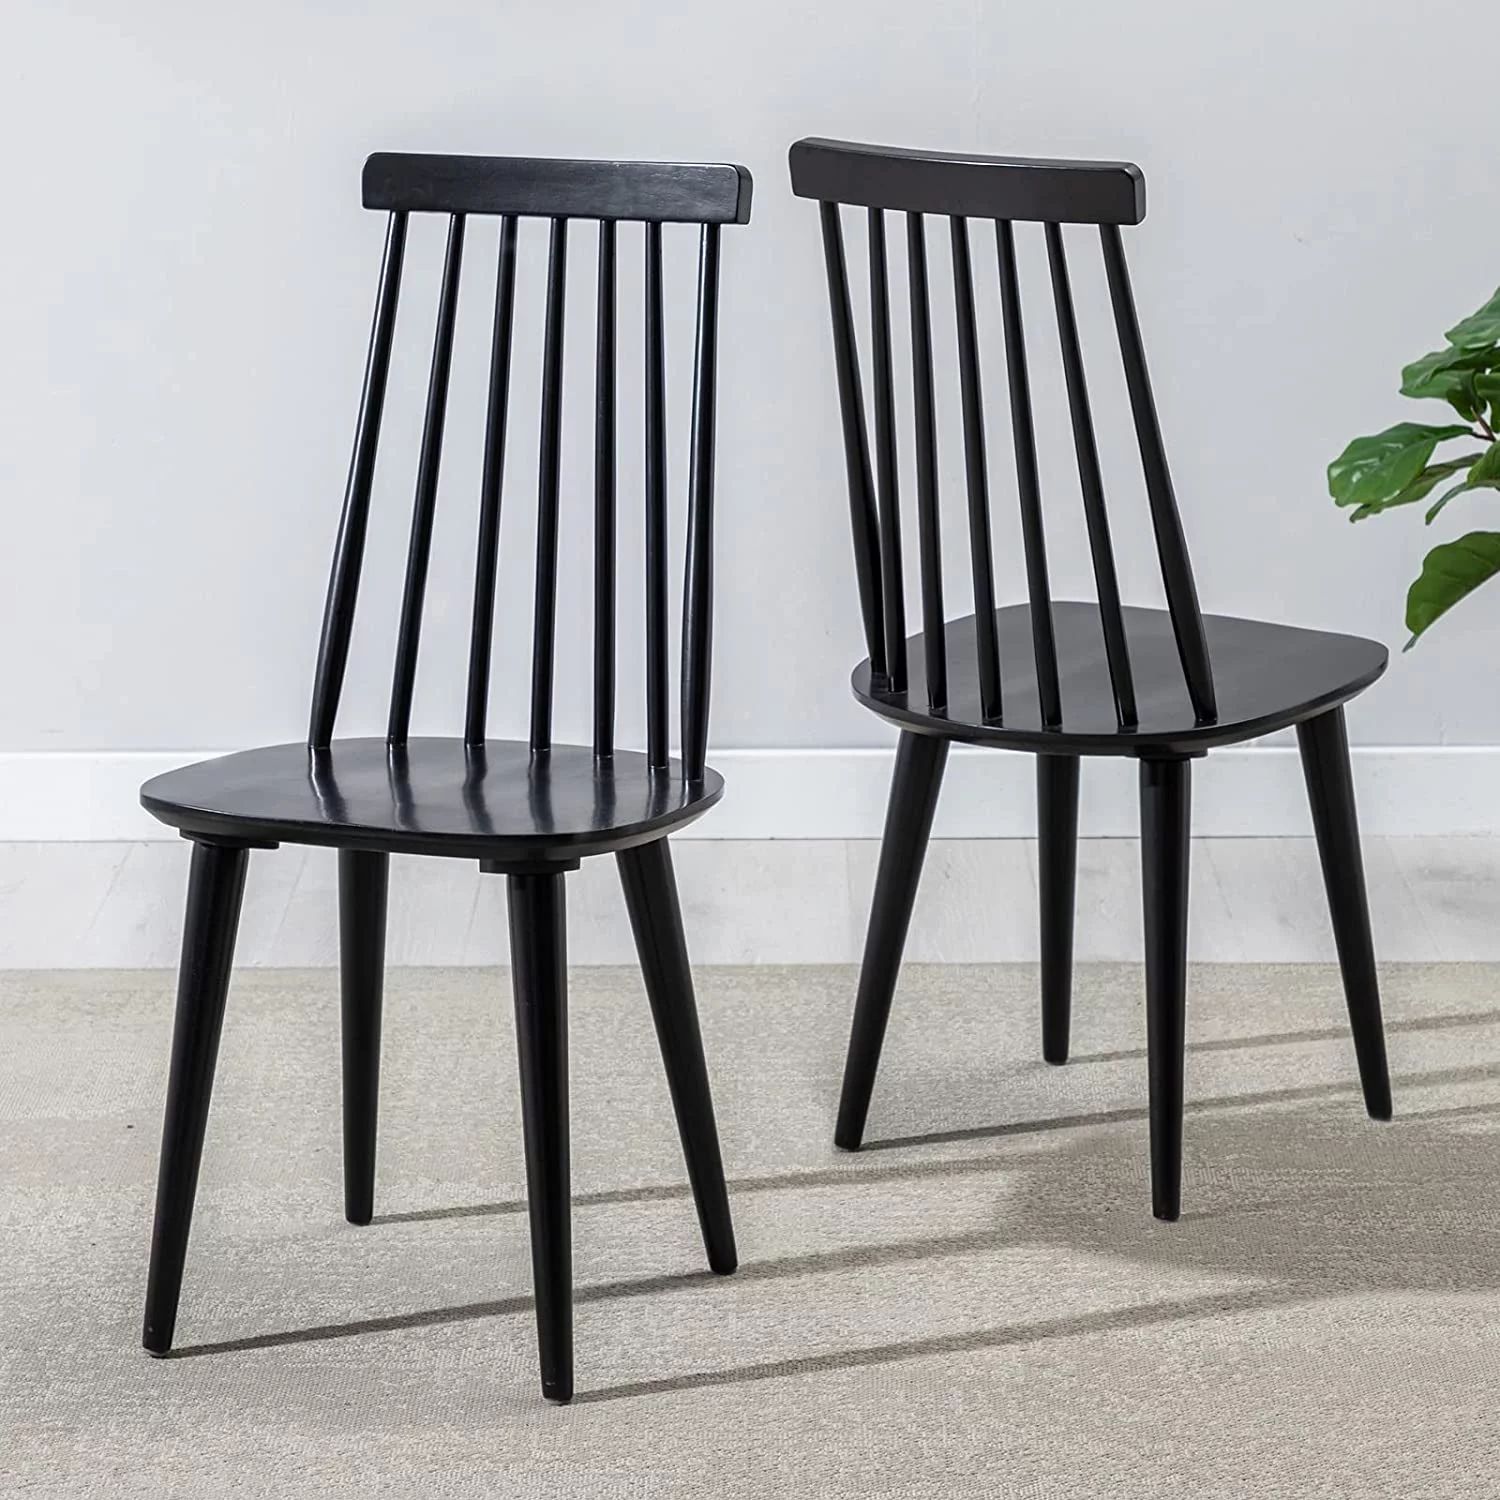 Duhome Dining Chairs Set of 2 Wood Dining Room Chair Black Spindle Chair for Kitchen, Windsor Cha... | Walmart (US)